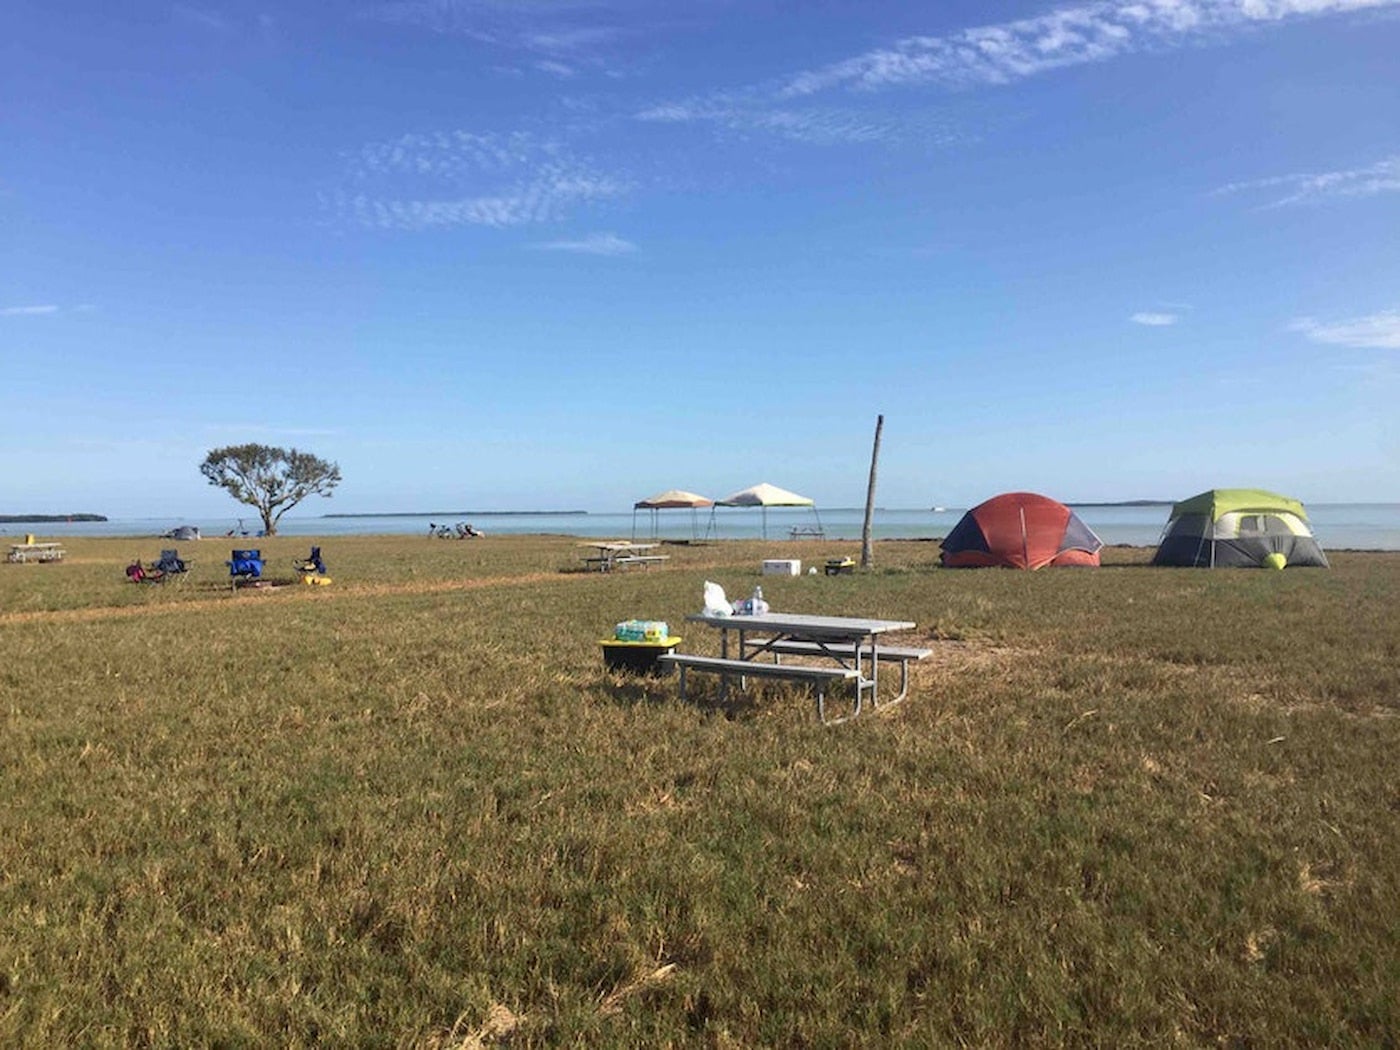 Field beside lagoon in the Florida everglades with dispersed camping tents and a picnic table.